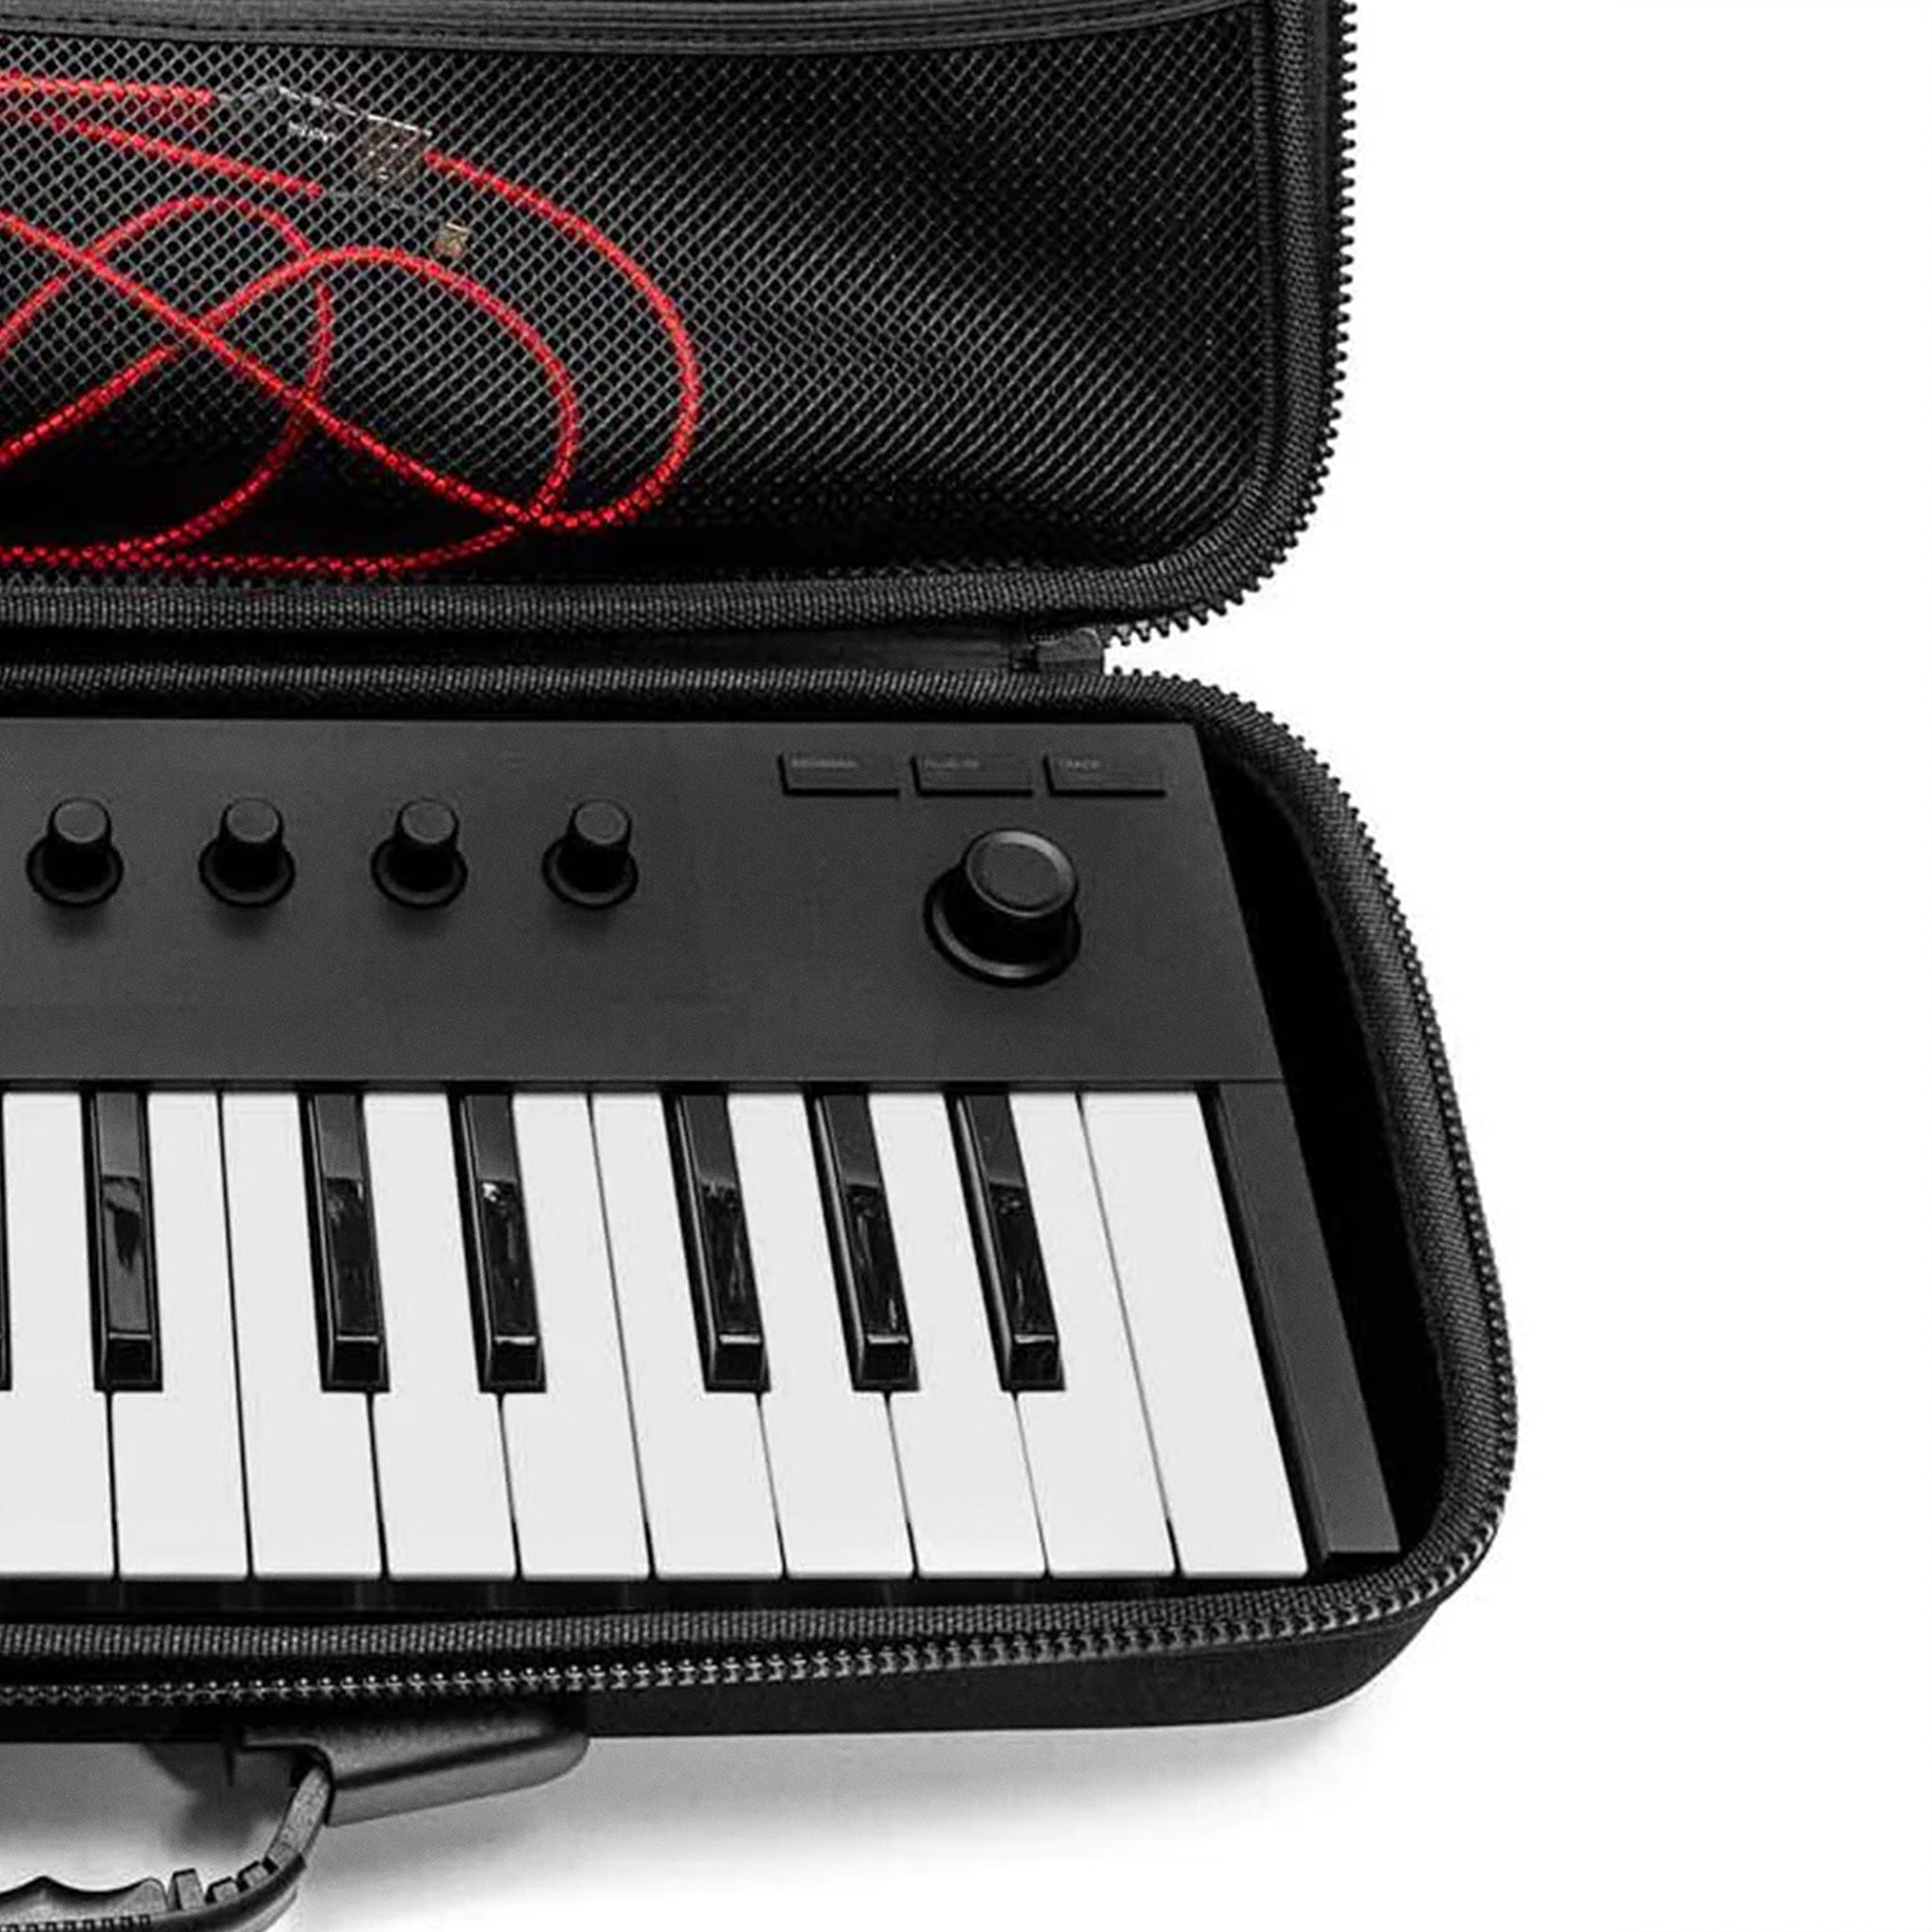 PULSE Case for Native Instruments M32